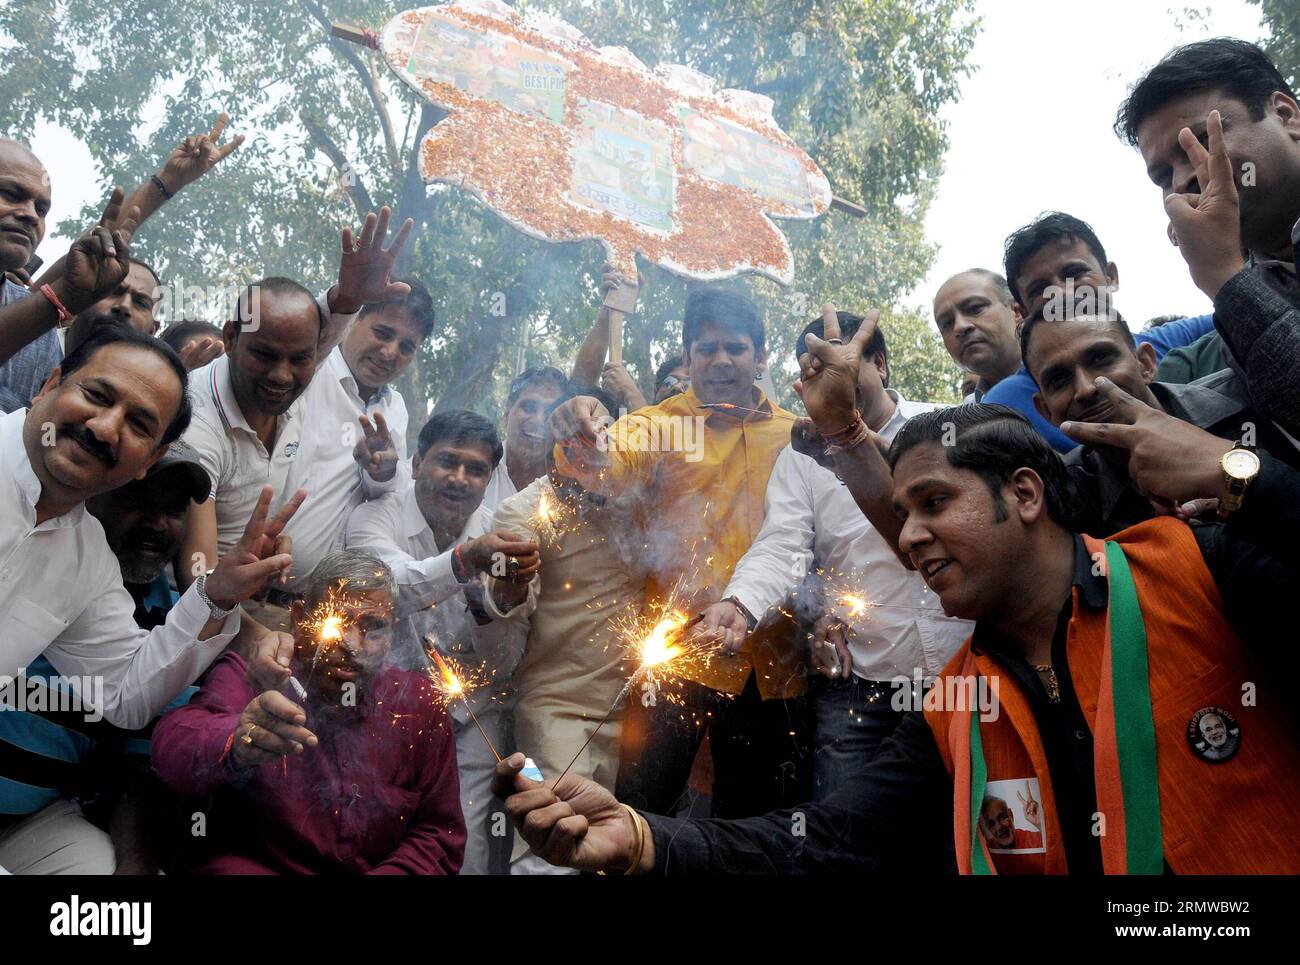 Bharatiya Janata Party (BJP) supporters celebrate outside the BJP headquarters as Haryana and Maharashtra states assembly elections results come out in New Delhi, India on Oct.19, 2014. India s ruling BJP has won control of the country s financial capital Mumbai through a legislative election in the state of Maharashtra, while also grasping the northern state of Haryana from the Congress, said vote counting results Sunday. )(wxl) INDIA-NEW DELHI-BJP-CELEBRATION ParthaxSarkar PUBLICATIONxNOTxINxCHN   Bharatiya Janata Party BJP Supporters Celebrate outside The BJP Headquarters As Haryana and Mah Stock Photo